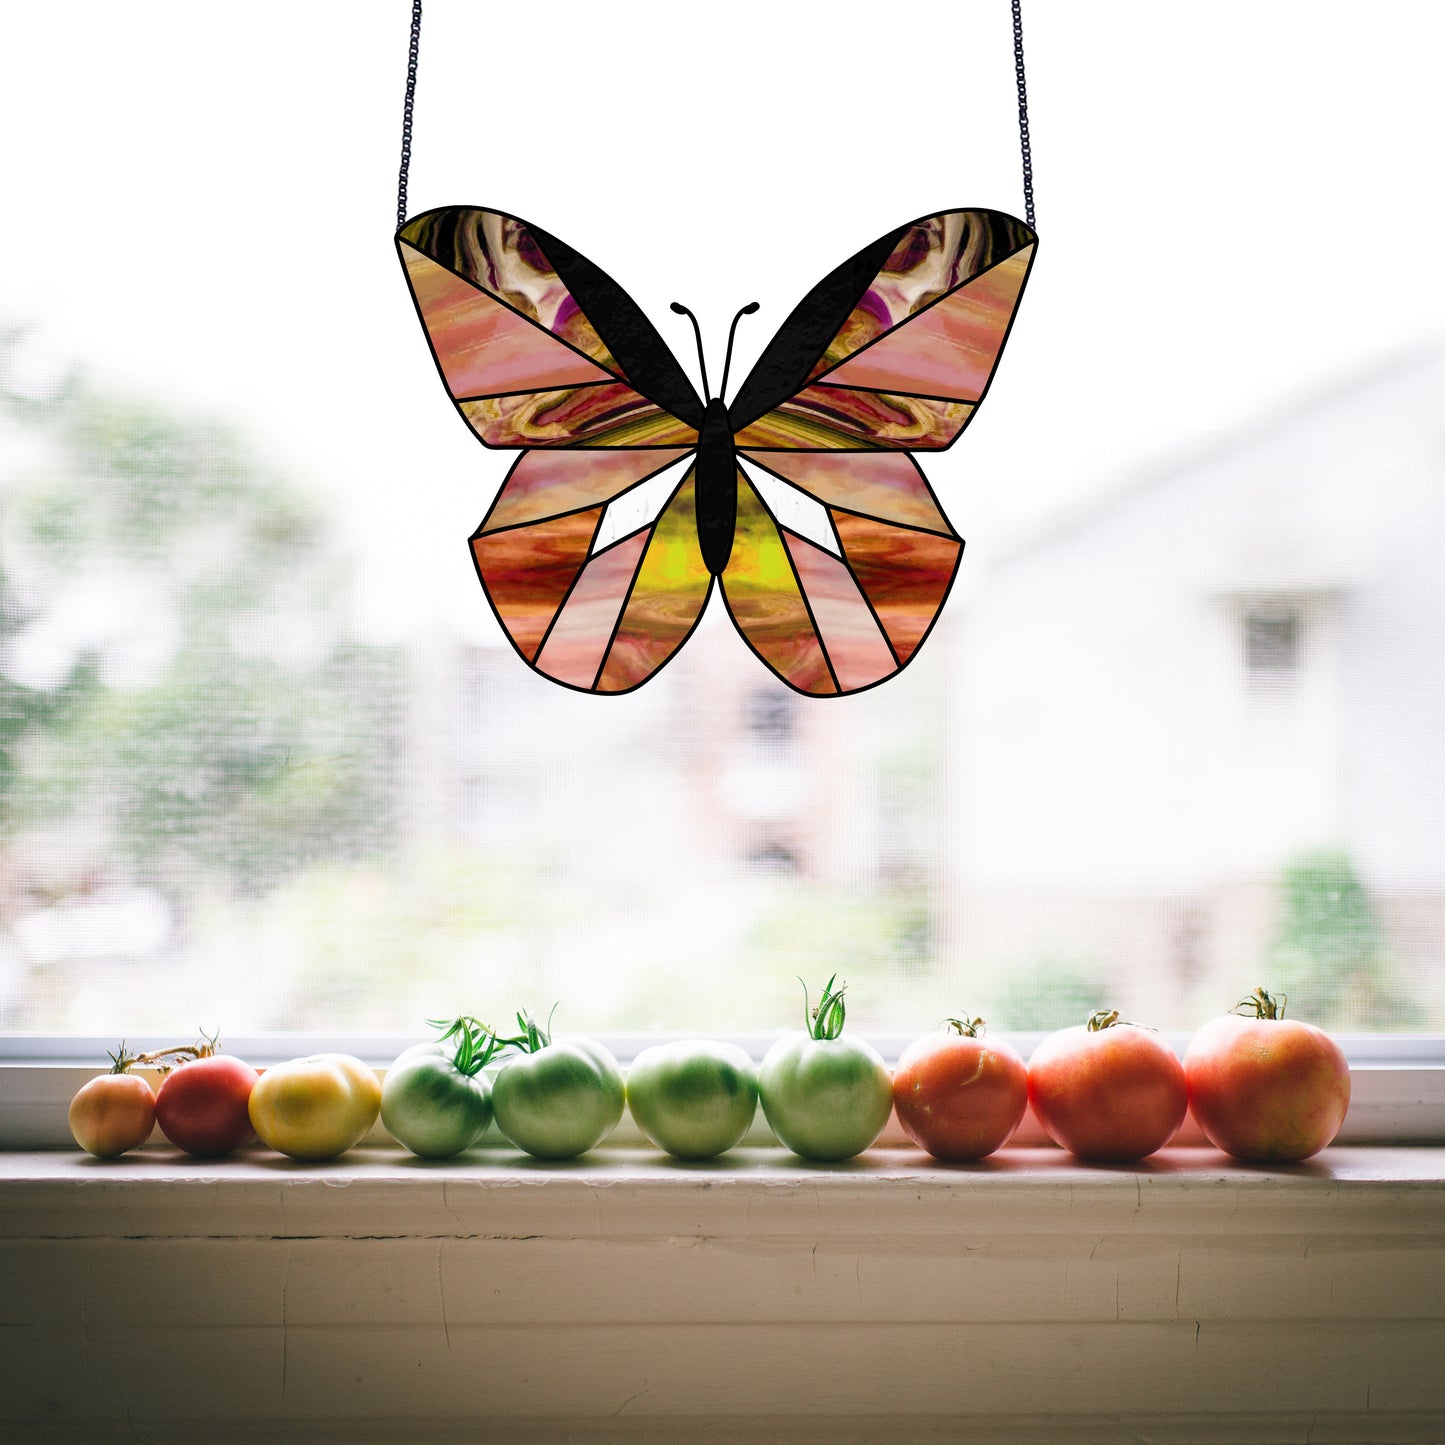 Beginner Butterfly Stained Glass Pattern